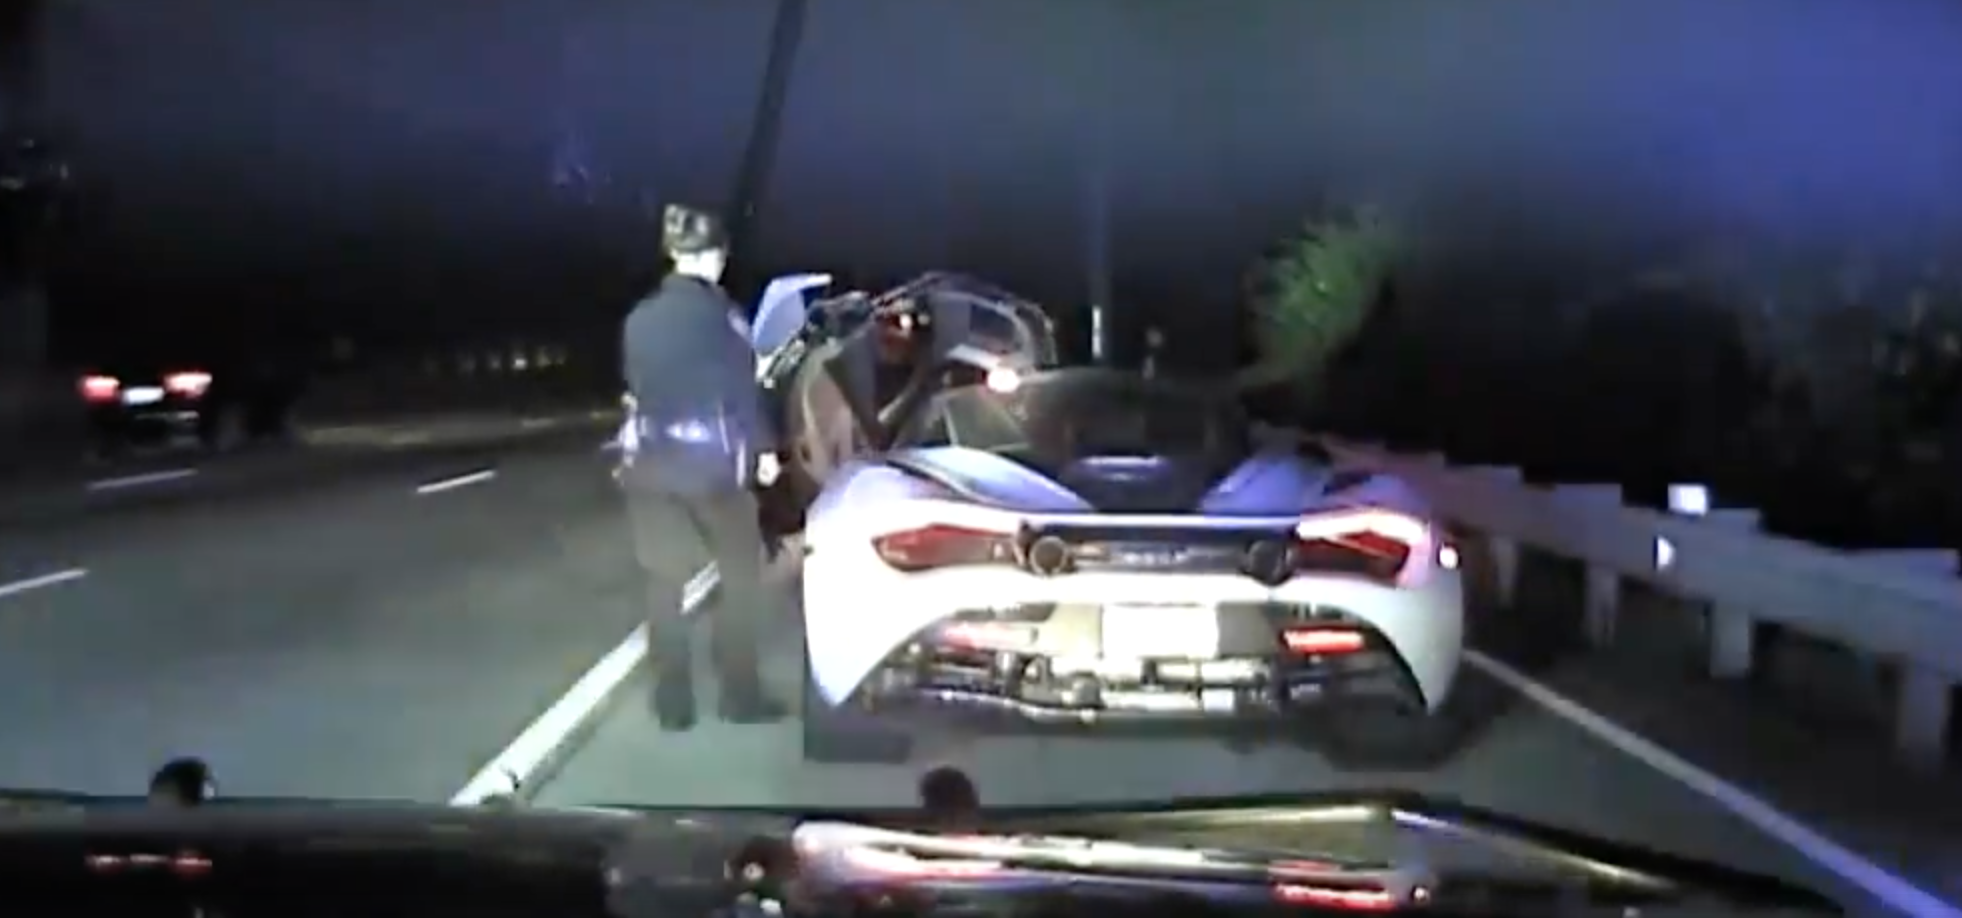 Dash cam shows LEO in a Charger chases down McLaren sports car at
155MPH